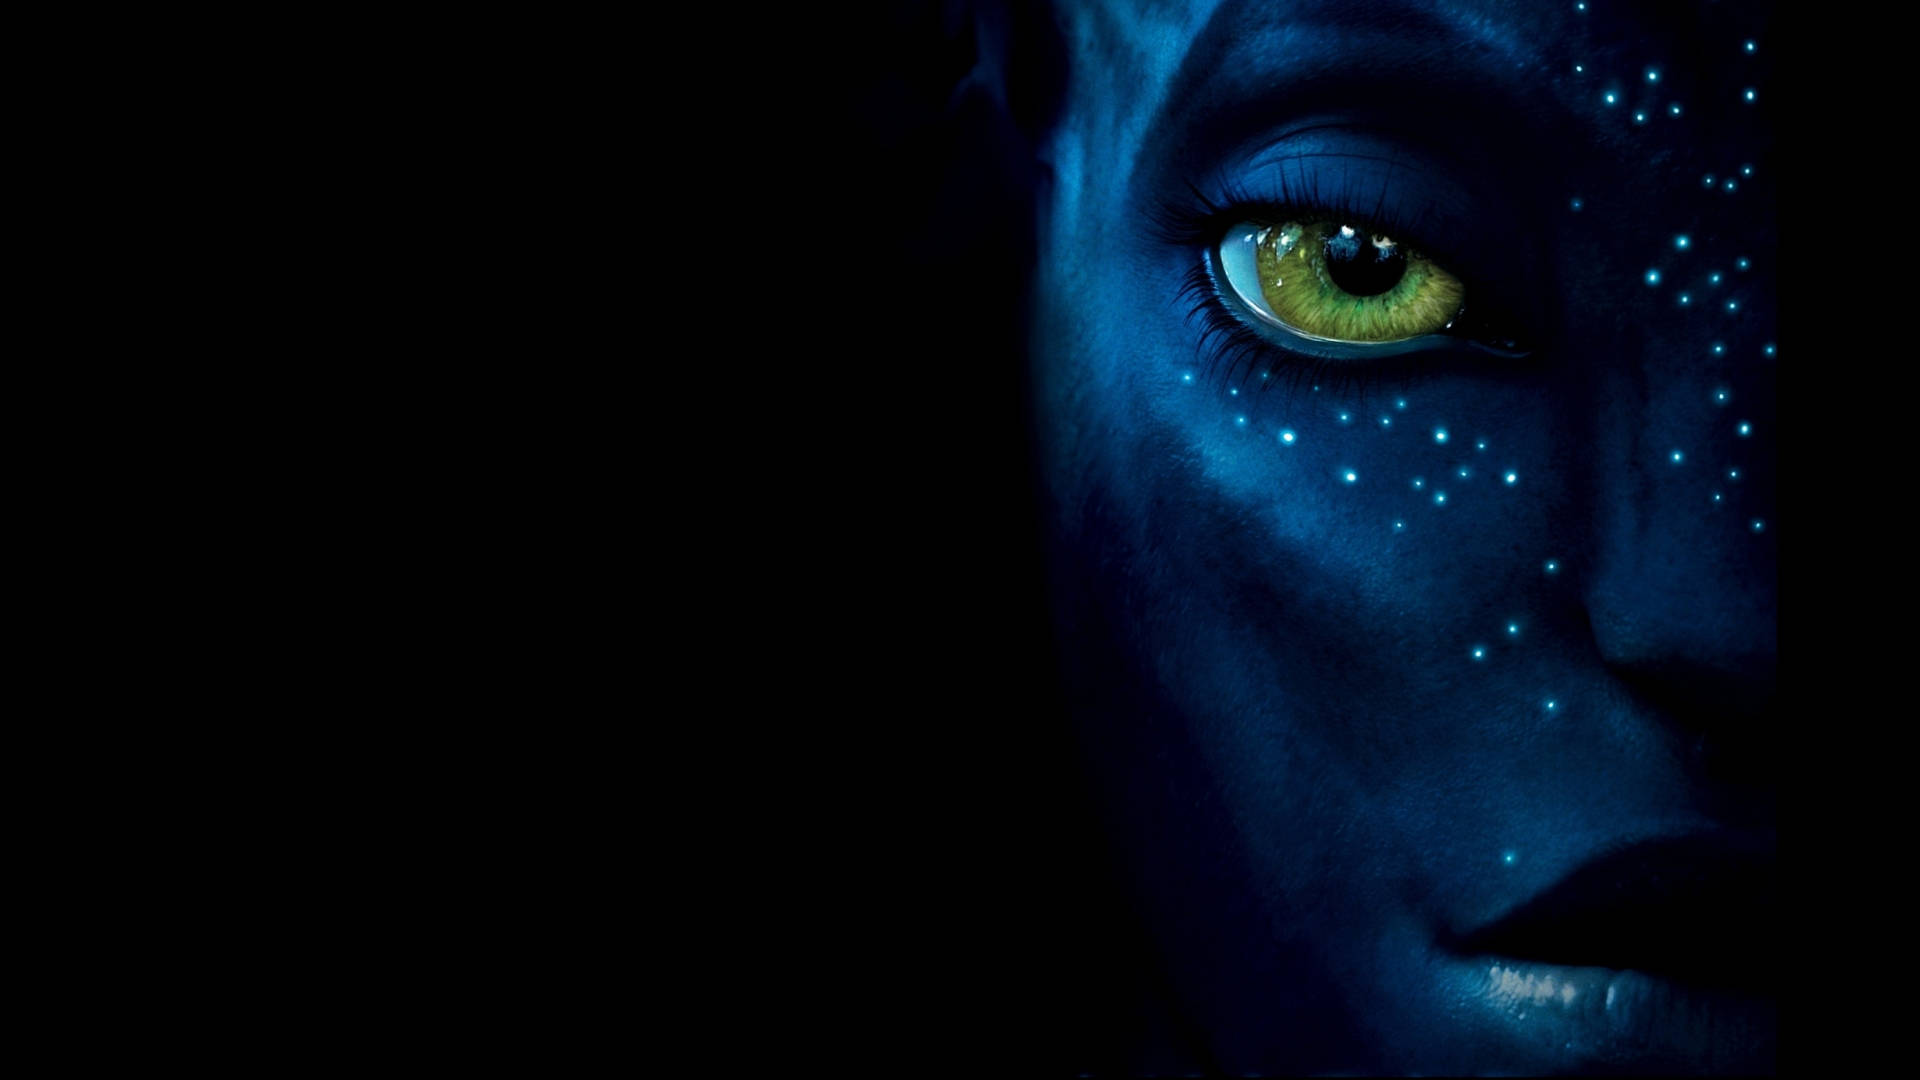 Free Avatar Wallpaper Downloads, [200+] Avatar Wallpapers for FREE |  